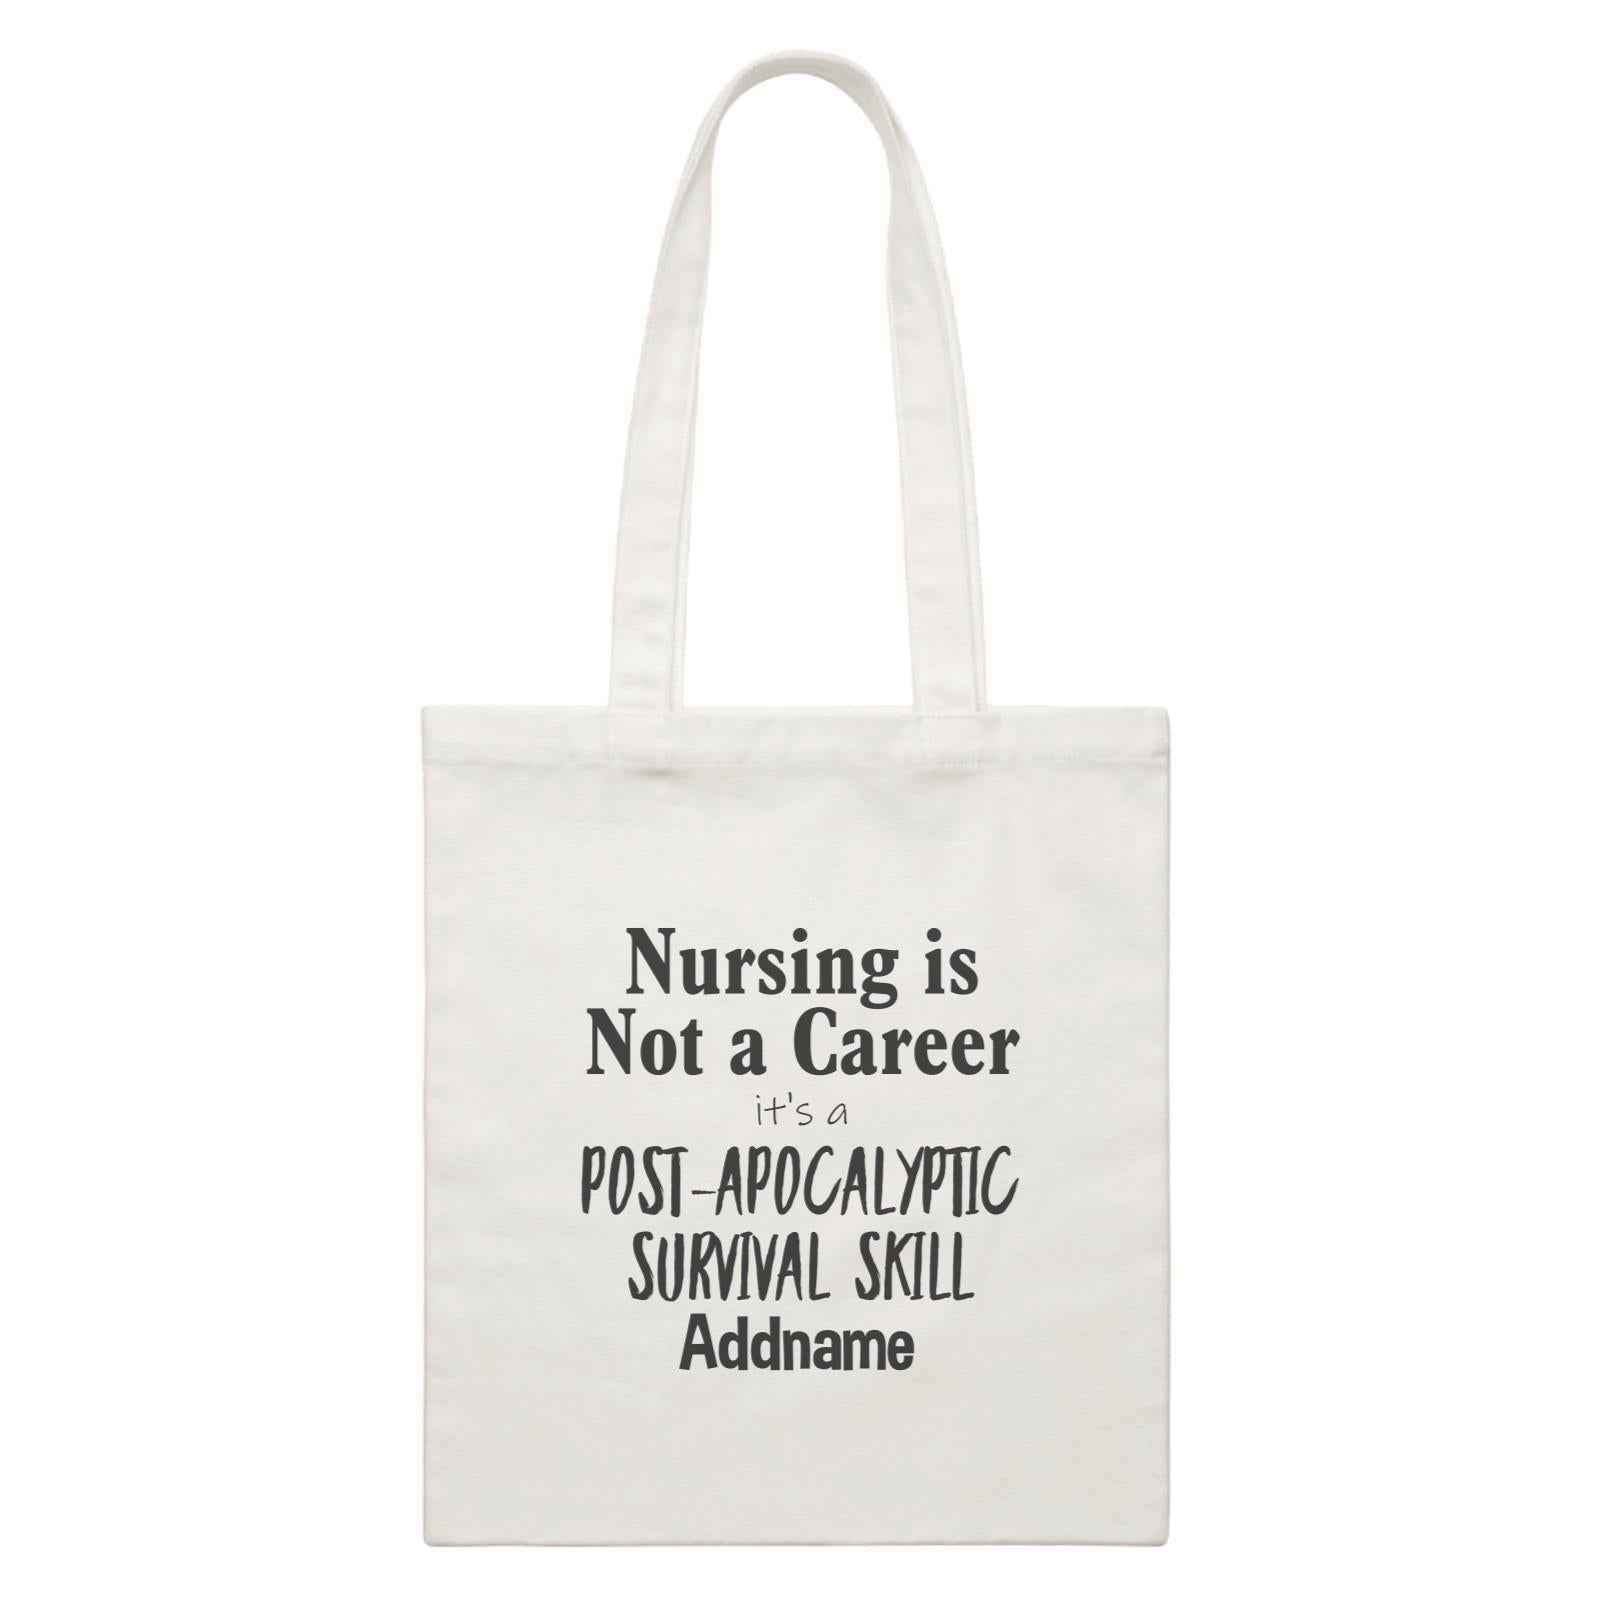 Nursing is Not a Career, It's a Post-Apocalyptic Survival Skill White Canvas Bag